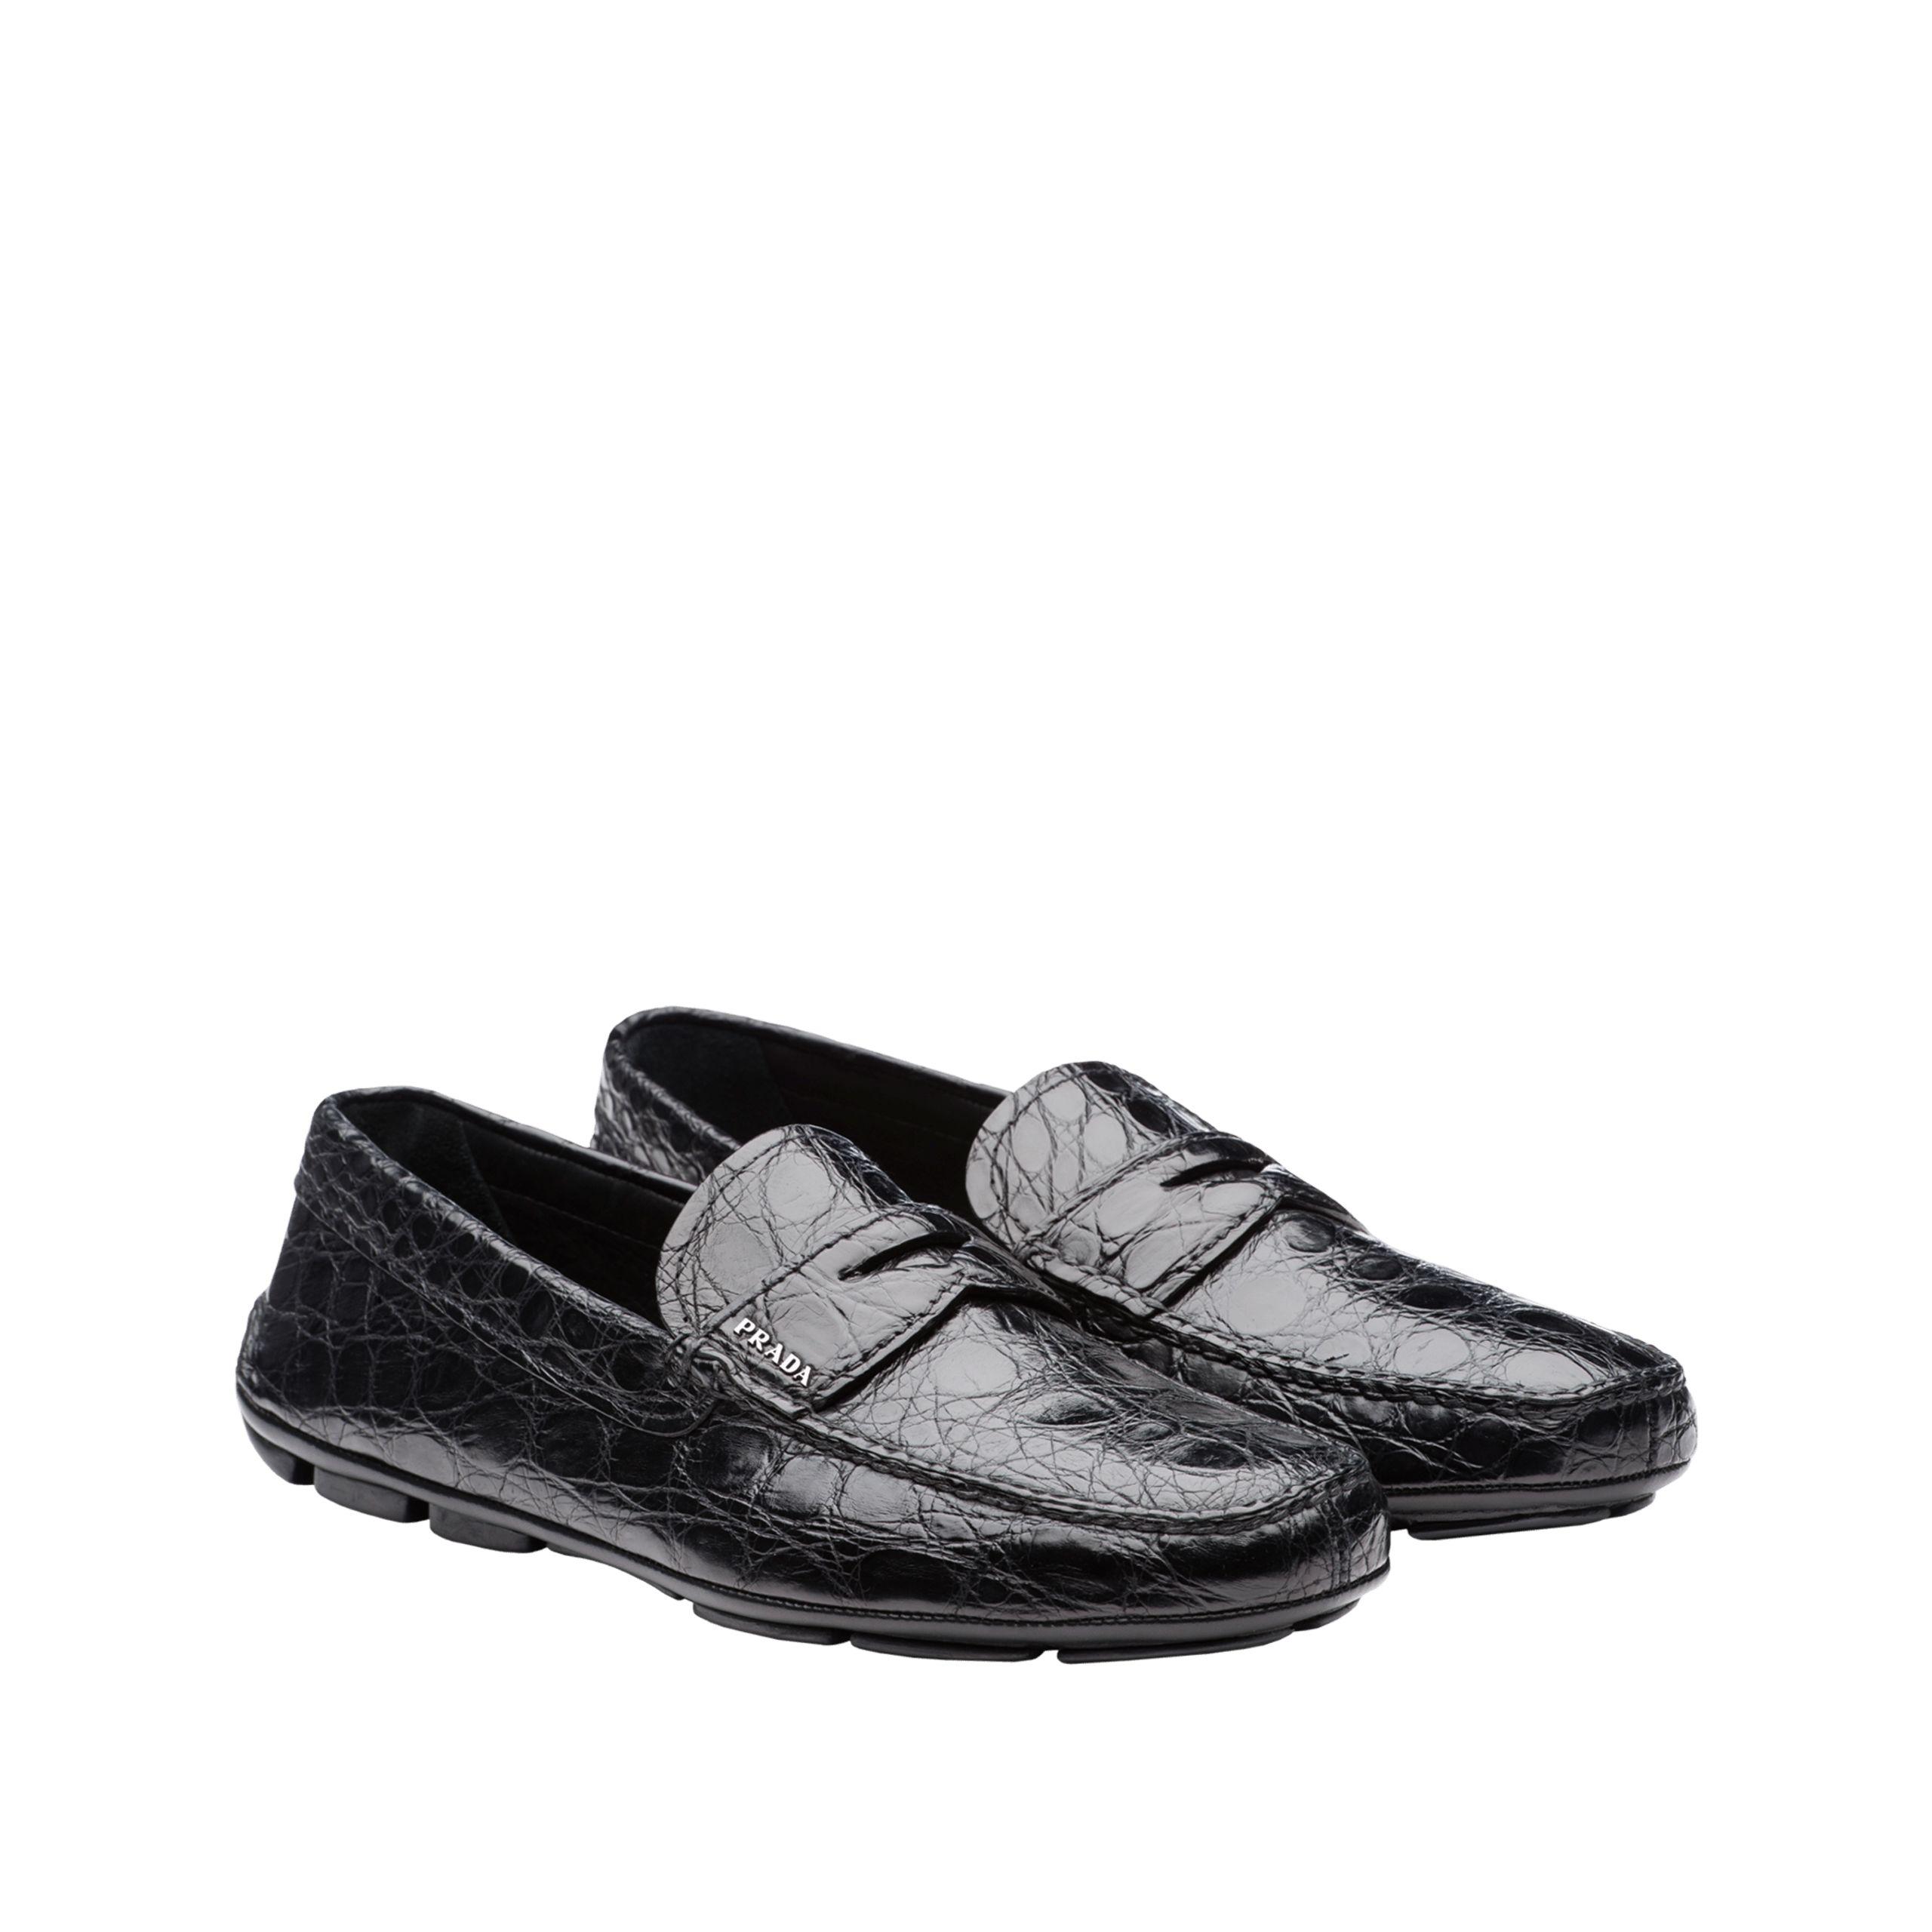 Prada Crocodile Leather Driving Shoes in Black for Men - Lyst